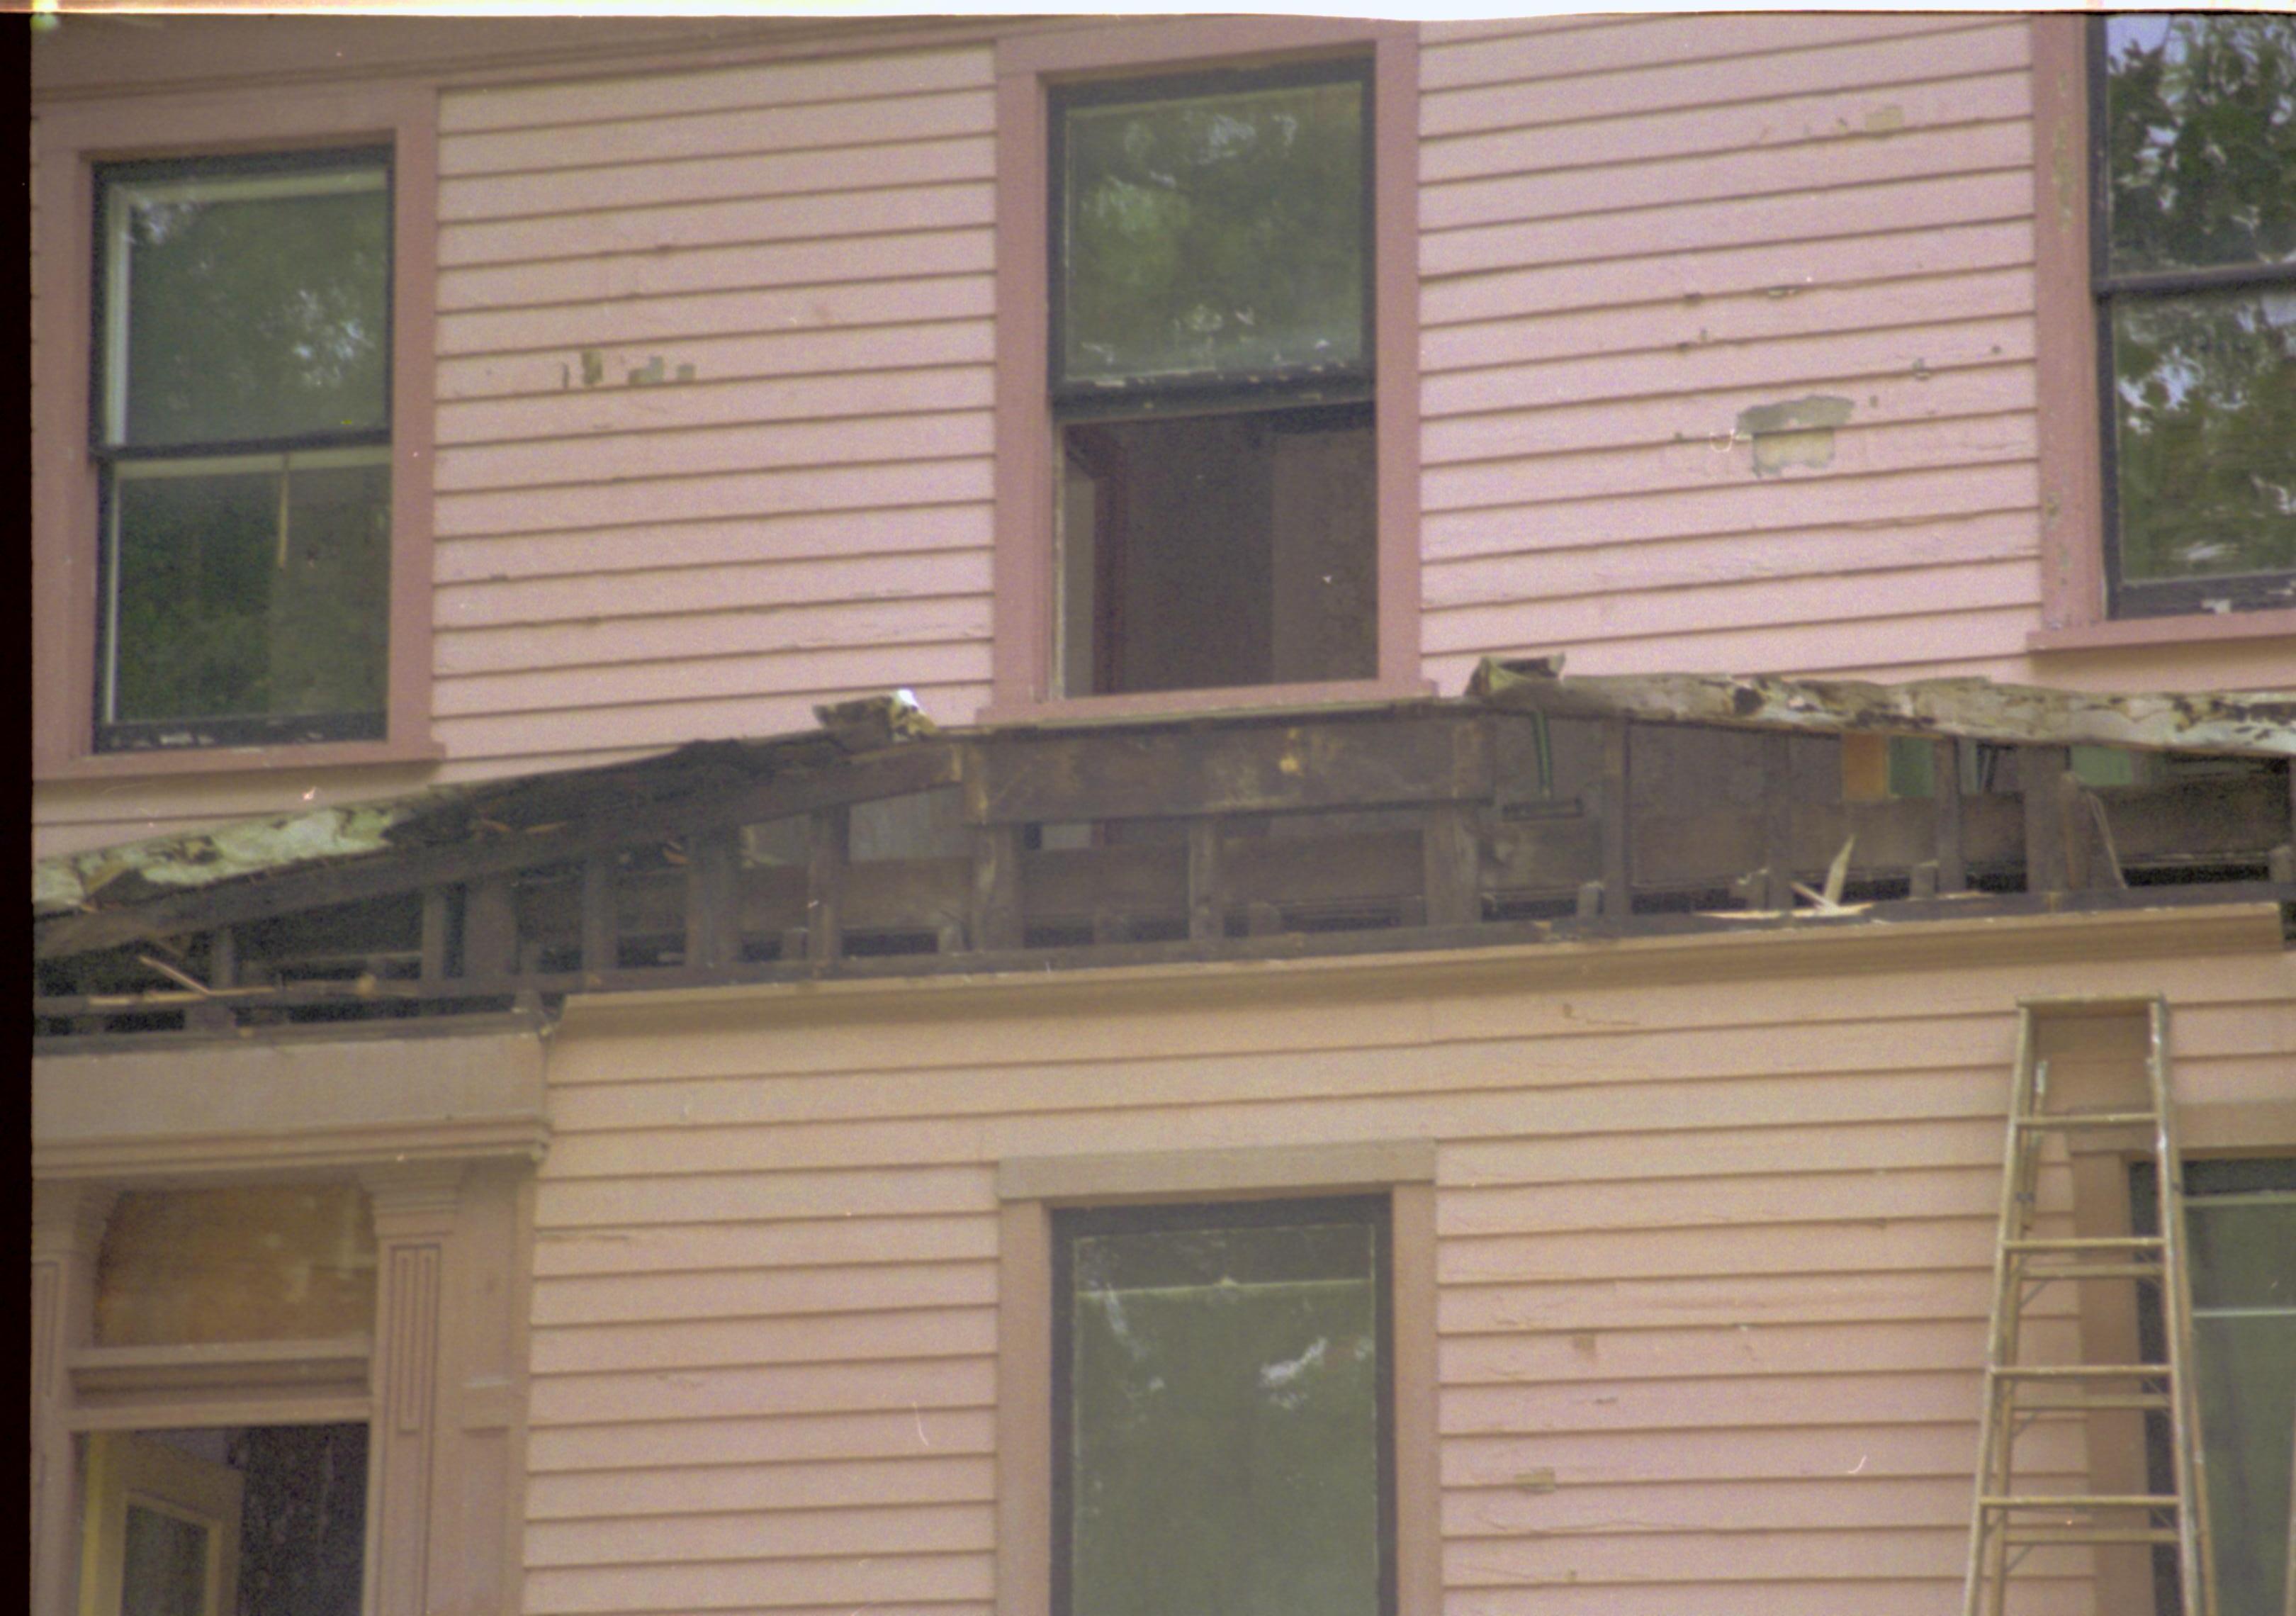 Dubois House, removal of porch Lincoln Home NHS- Sprigg House, Roll 1998-5, exp 14 Dubois House, restoration, porch